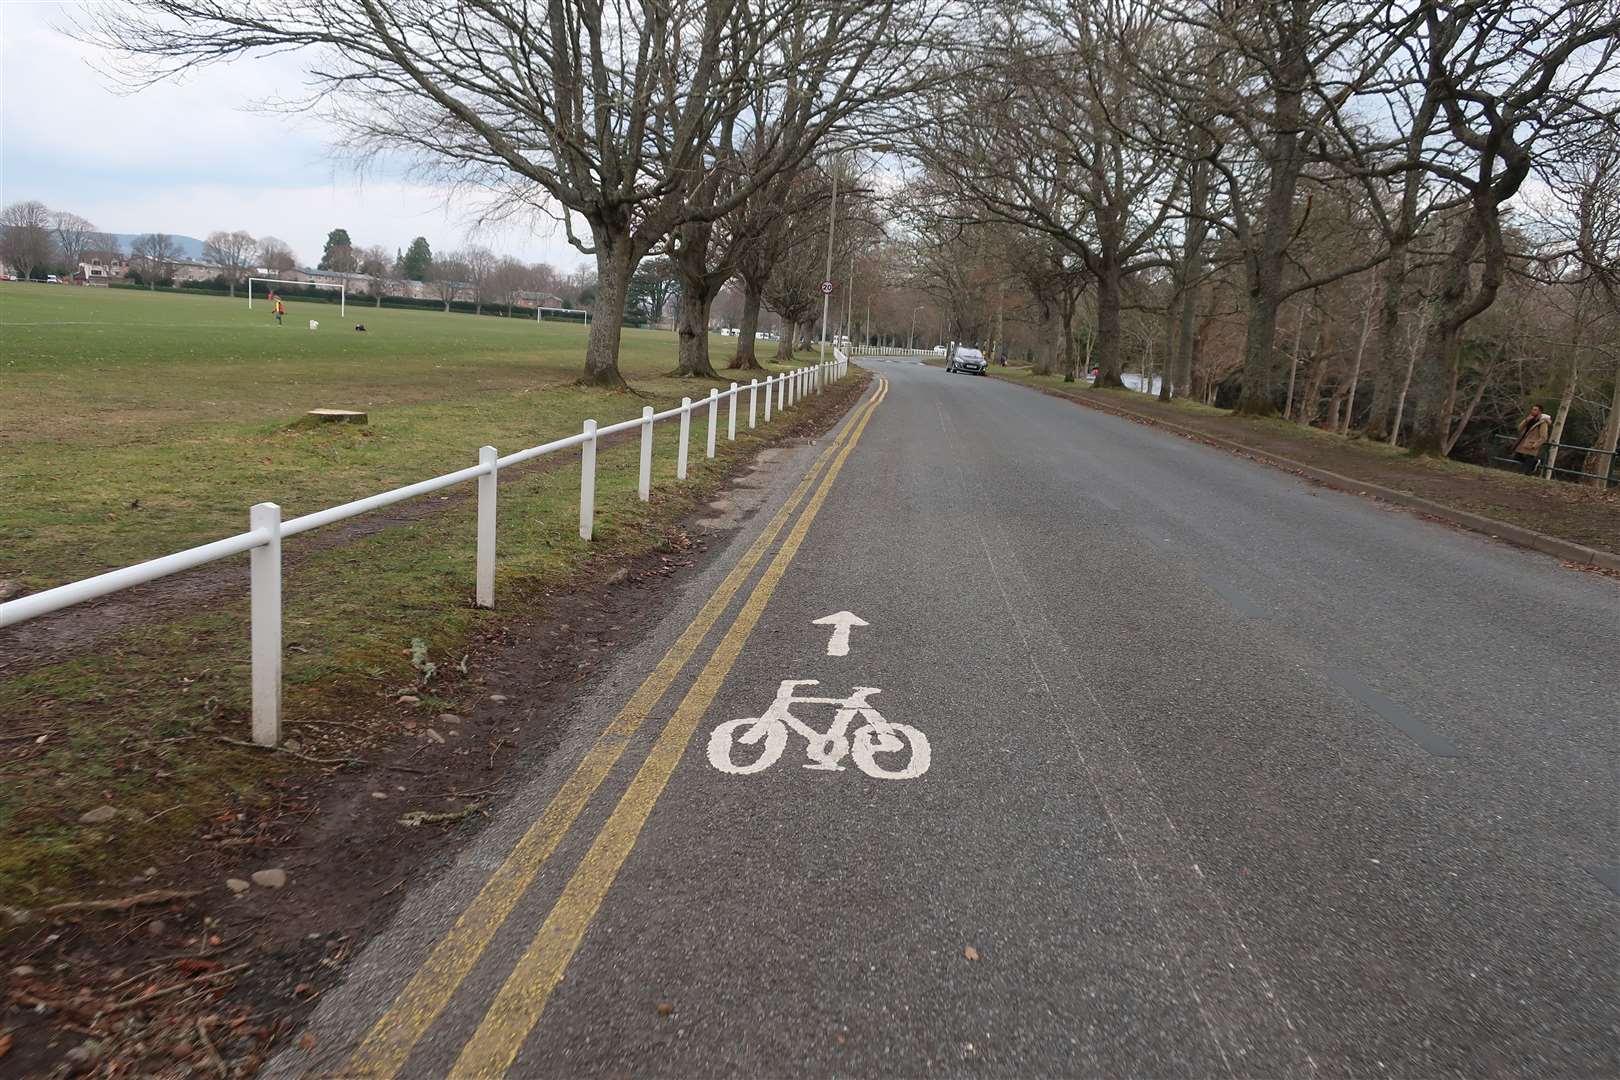 The contraflow cycle lane by Bught Park - where fresh white lines have since been painted at last.